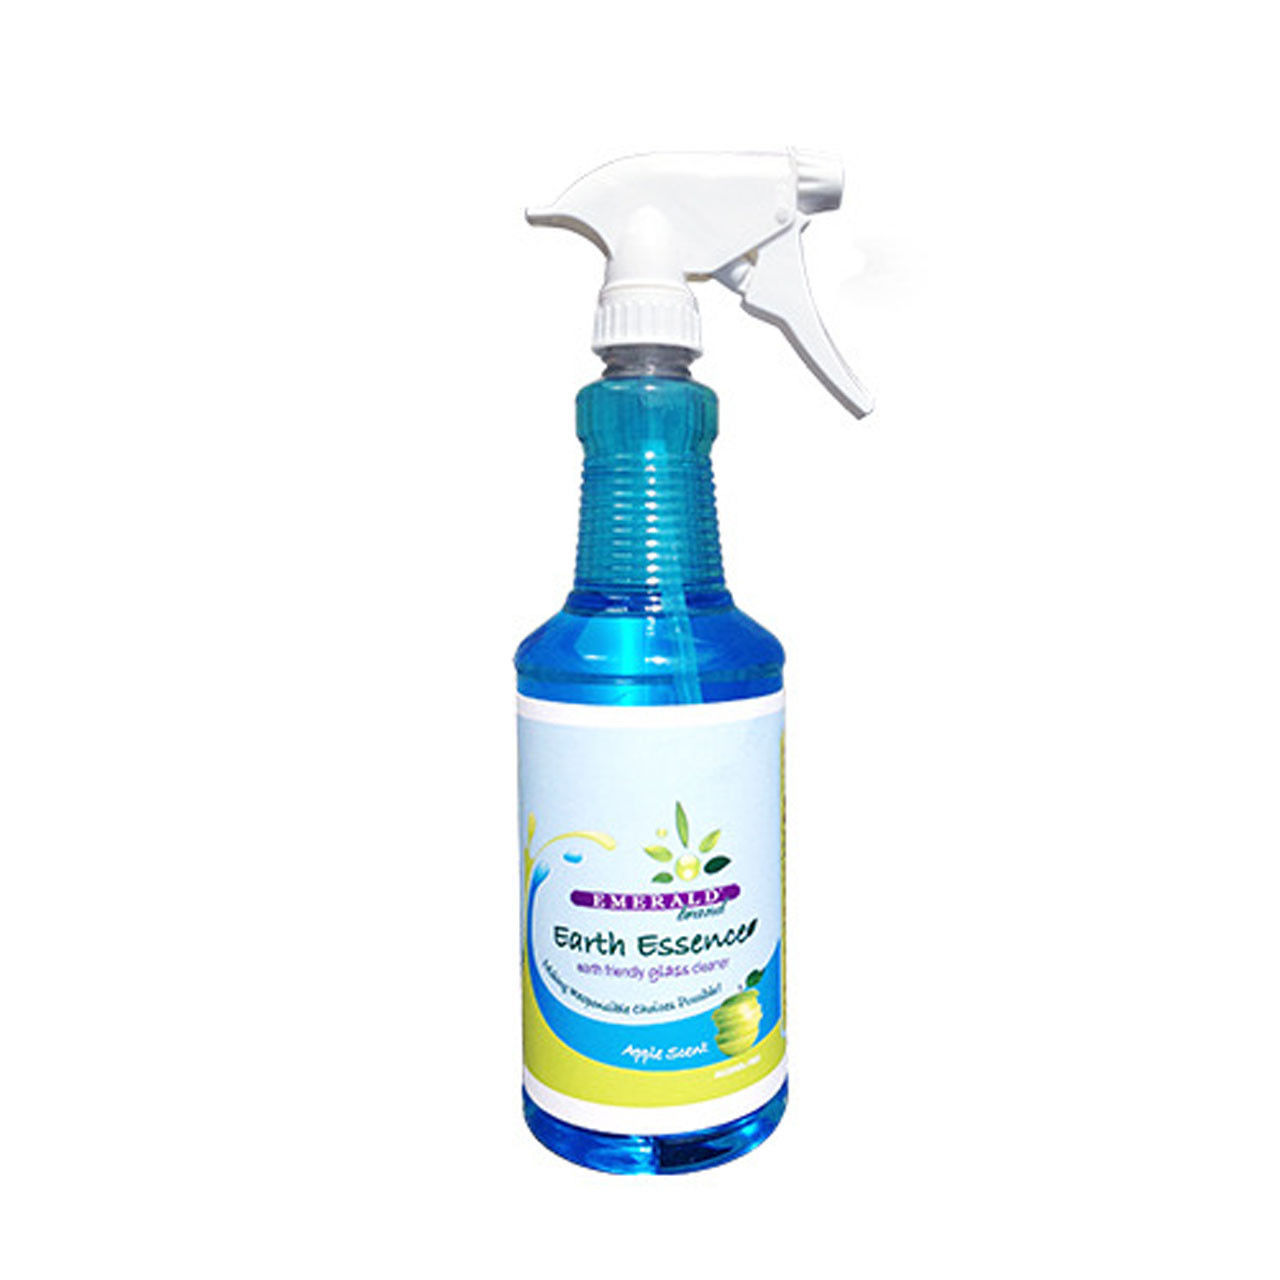 What is the size of the Emerald Earth Essence Glass Cleaner?